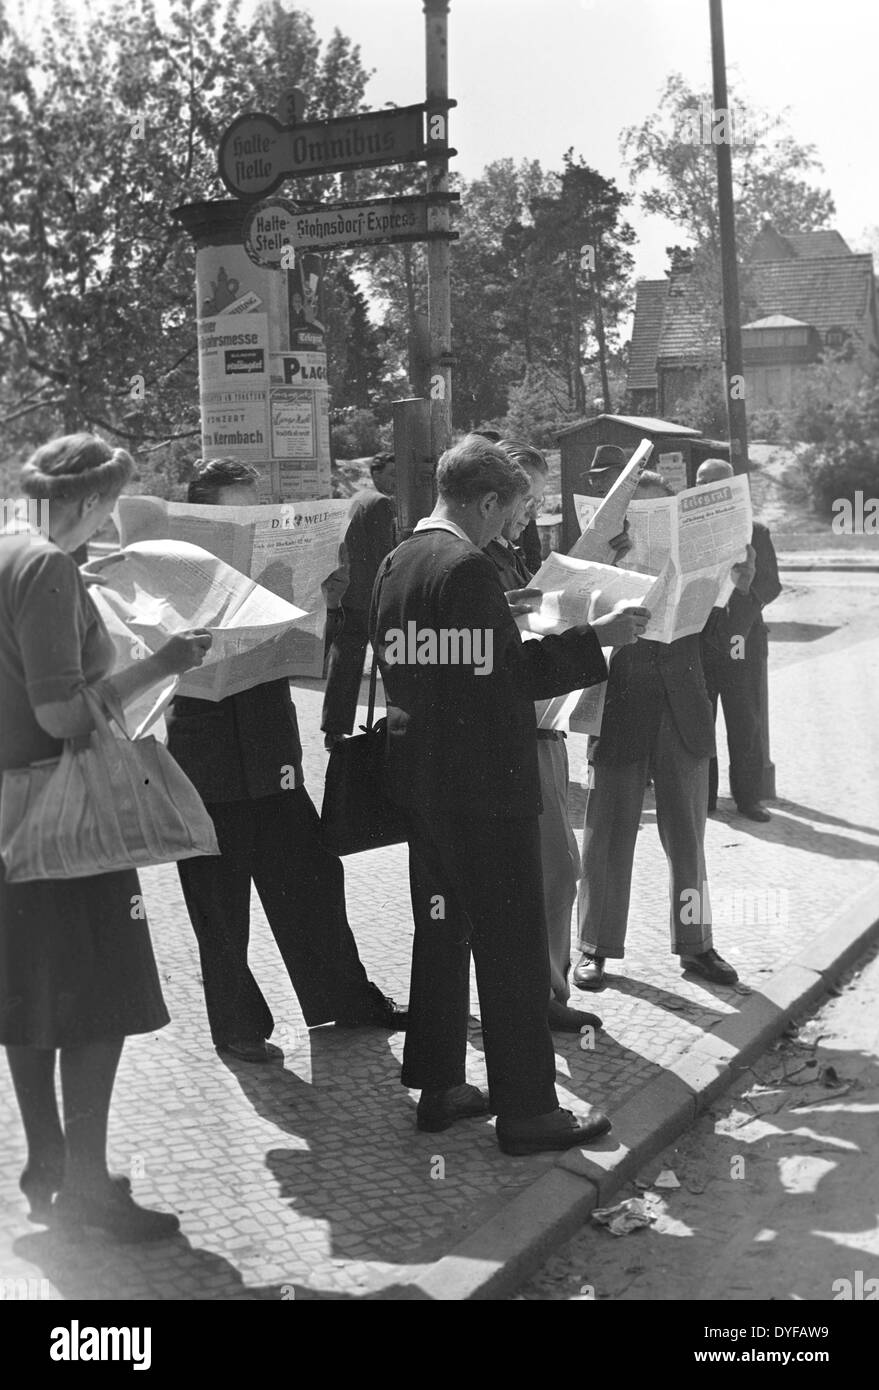 The end of the Berlin Blockade - Berlin citizens are reading about the announced lifting of the Berlin Blockade in the daily news, at a bus station of 'Stahnsdorf Express' in Berlin. Stock Photo